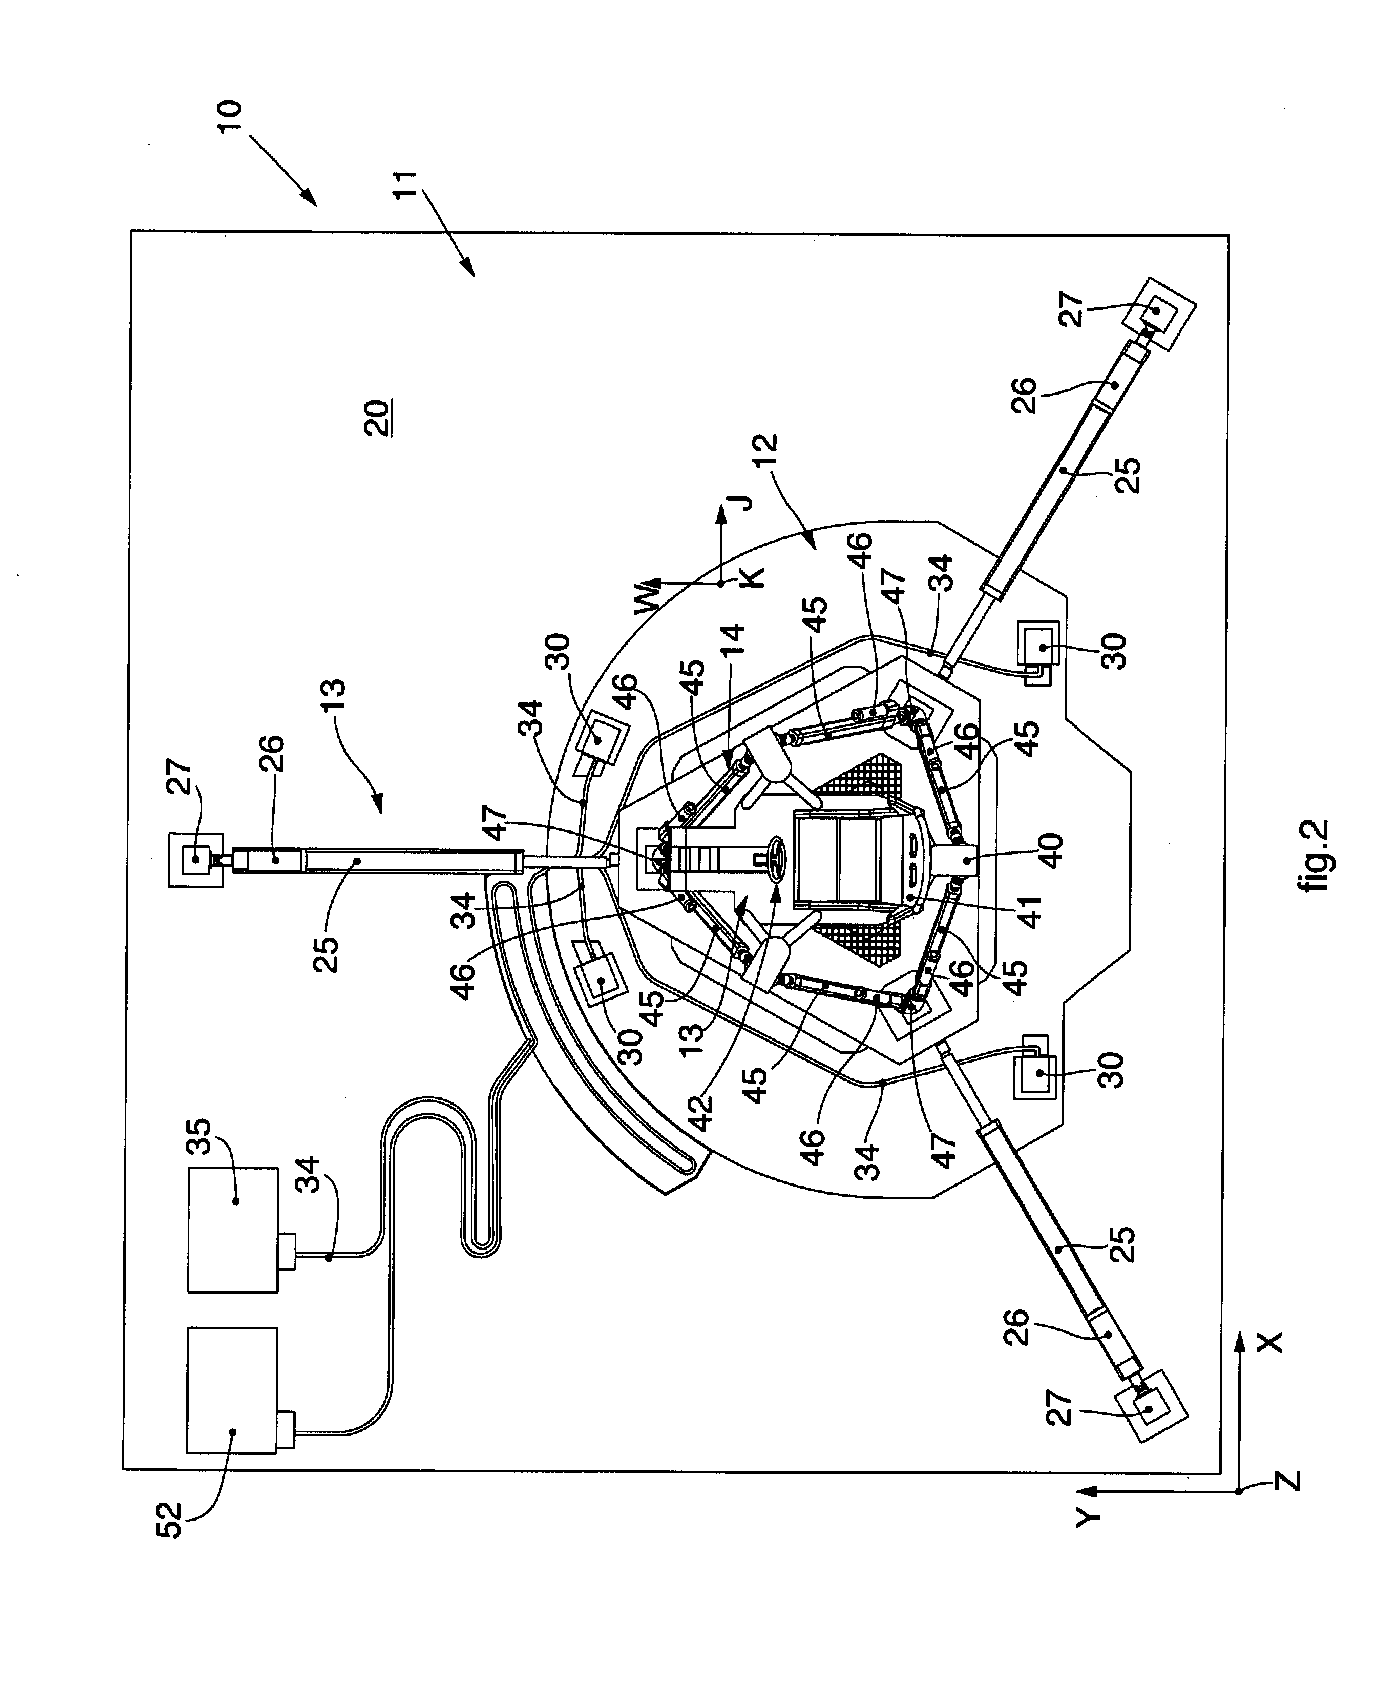 Apparatus to simulate driving a land vehicle